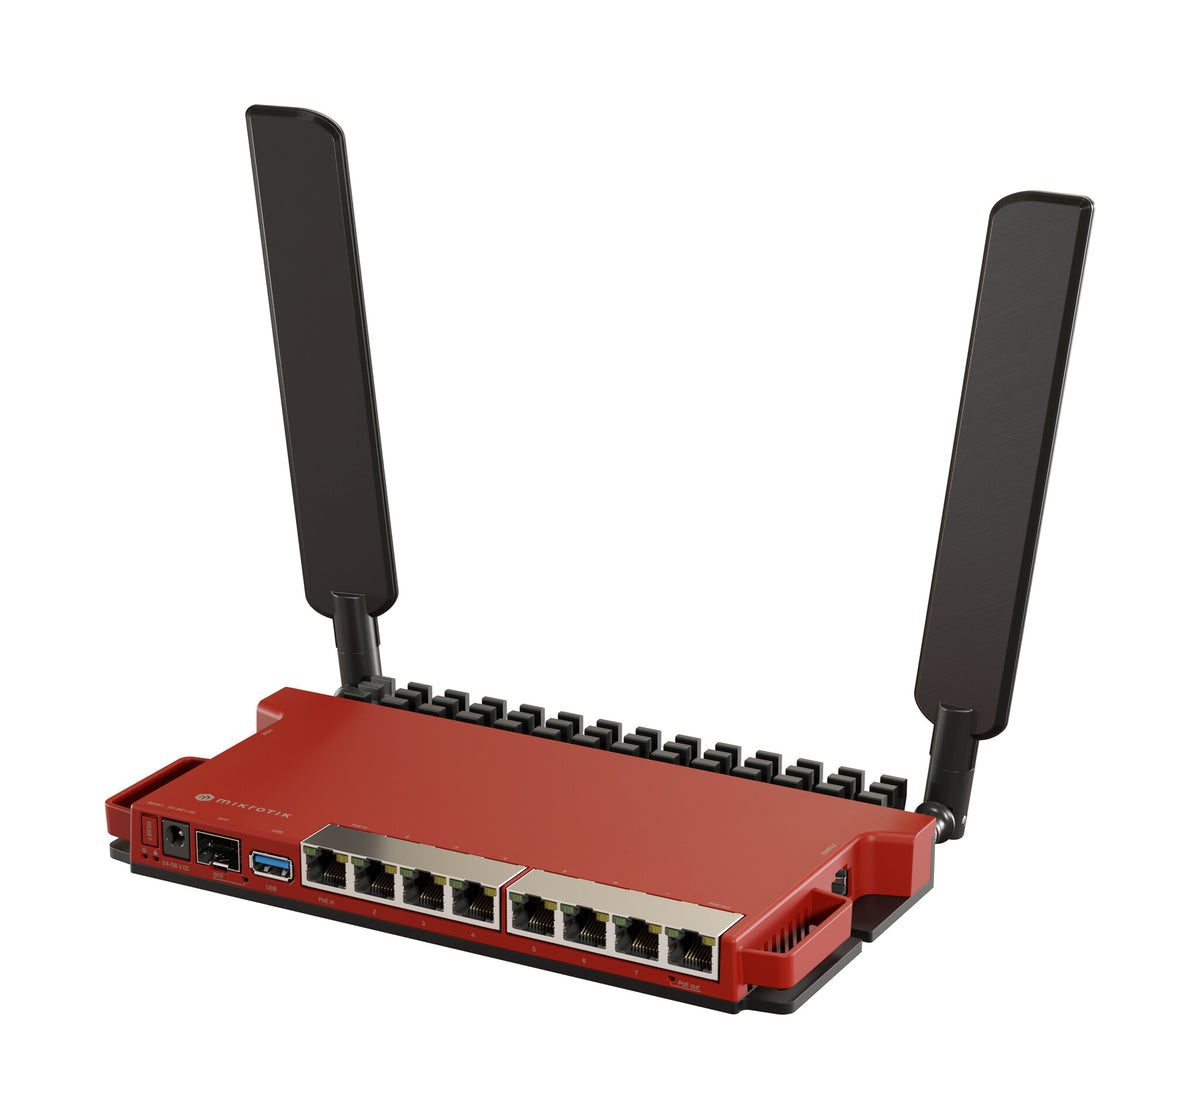 Mikrotik L009UiGS-2HaxD-IN - Gigabit Ethernet Single-band (2.4 GHz) wireless router in Red